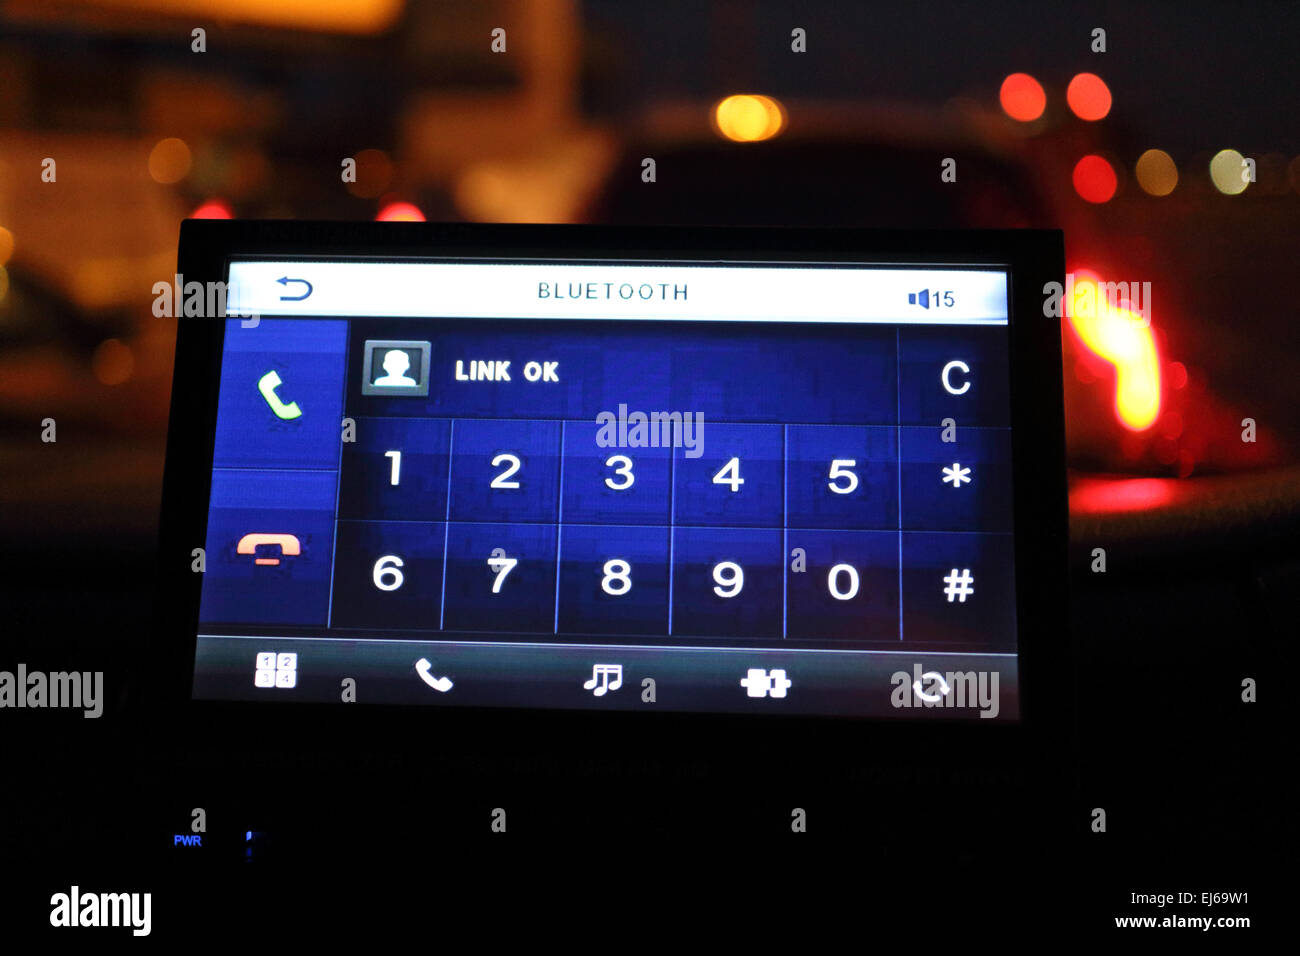 bluetooth mobile phone link screen in vehicle dashboard in traffic at night Stock Photo